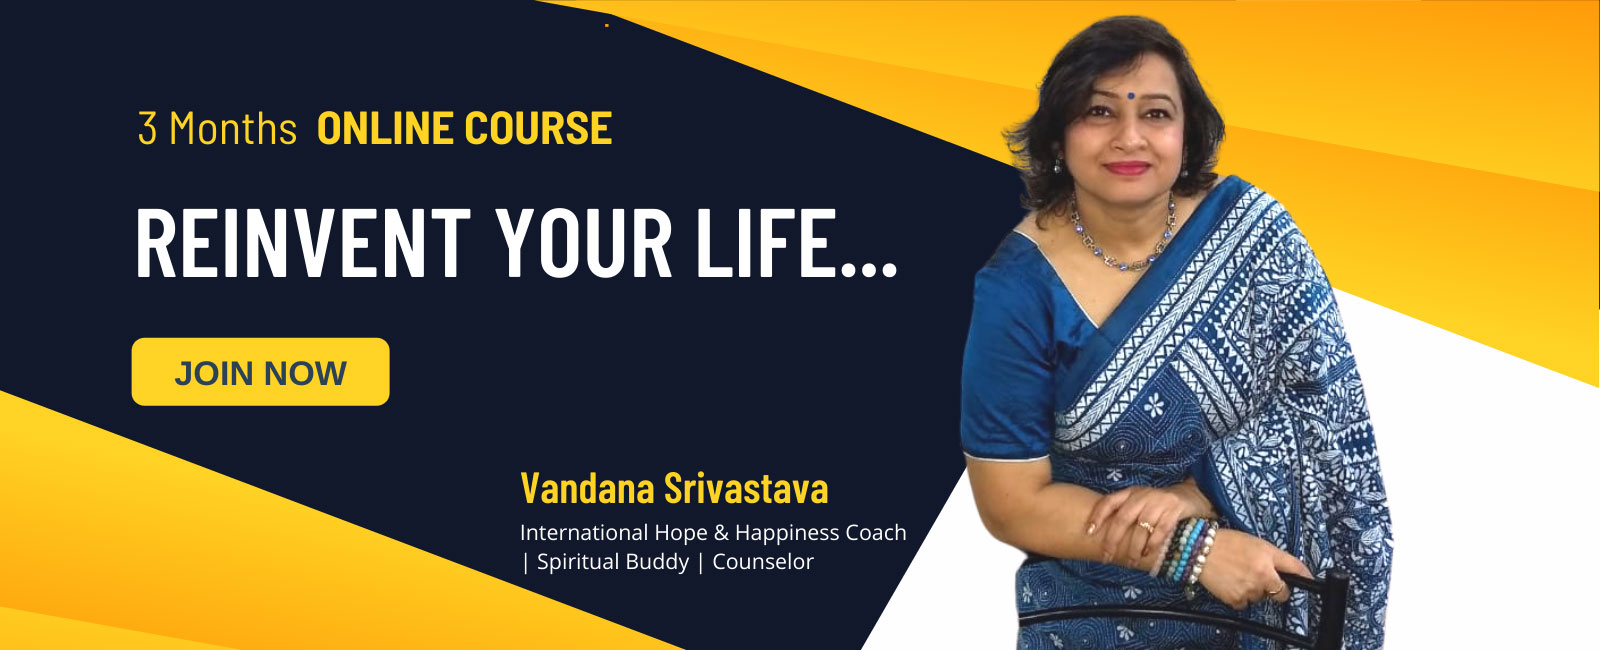 Online Course - Reinvent Your Life